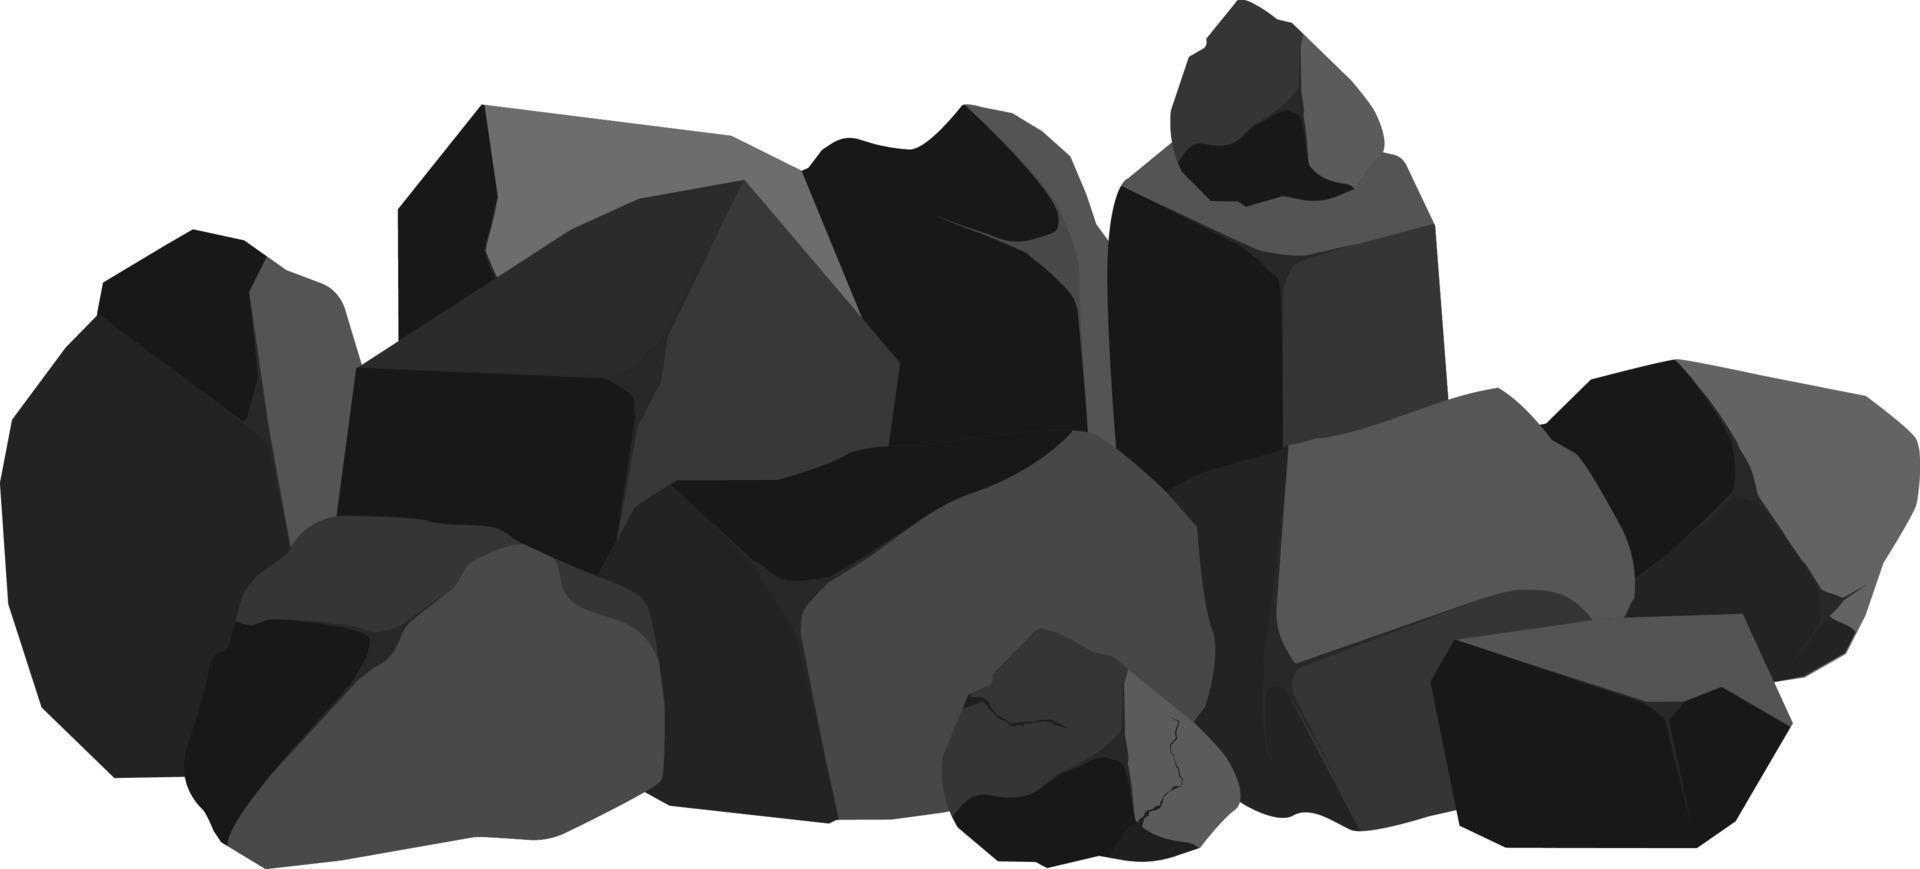 A set of black charcoal of various shapes.Collection of pieces of coal, graphite, basalt and anthracite. The concept of mining and ore in a mine.Rock fragments,boulders and building material. vector